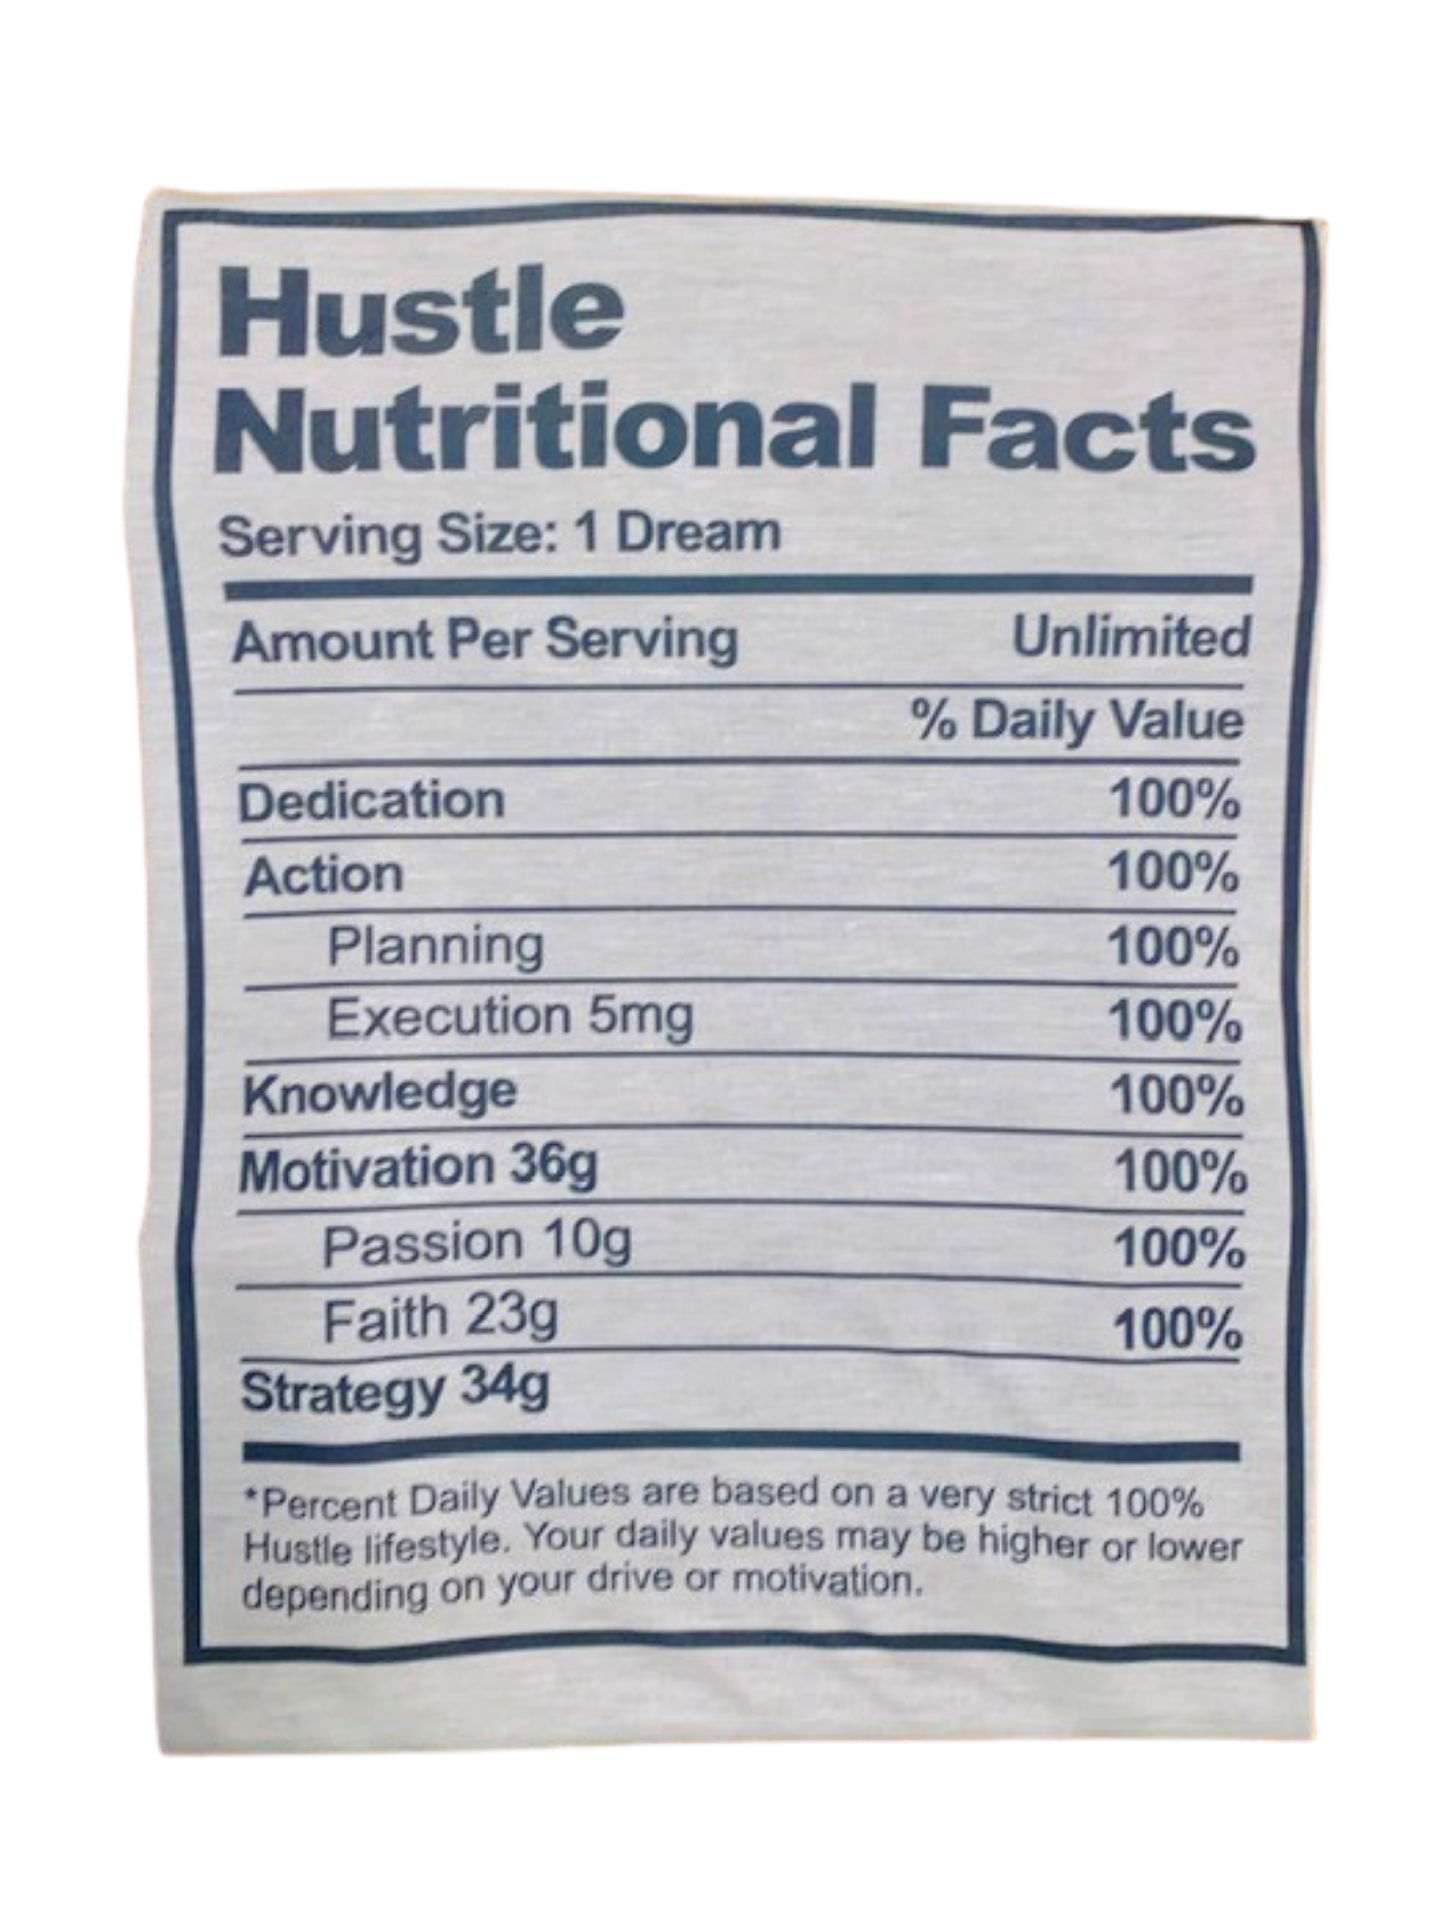 Grind Tee ~ Hustle Nutrition Facts